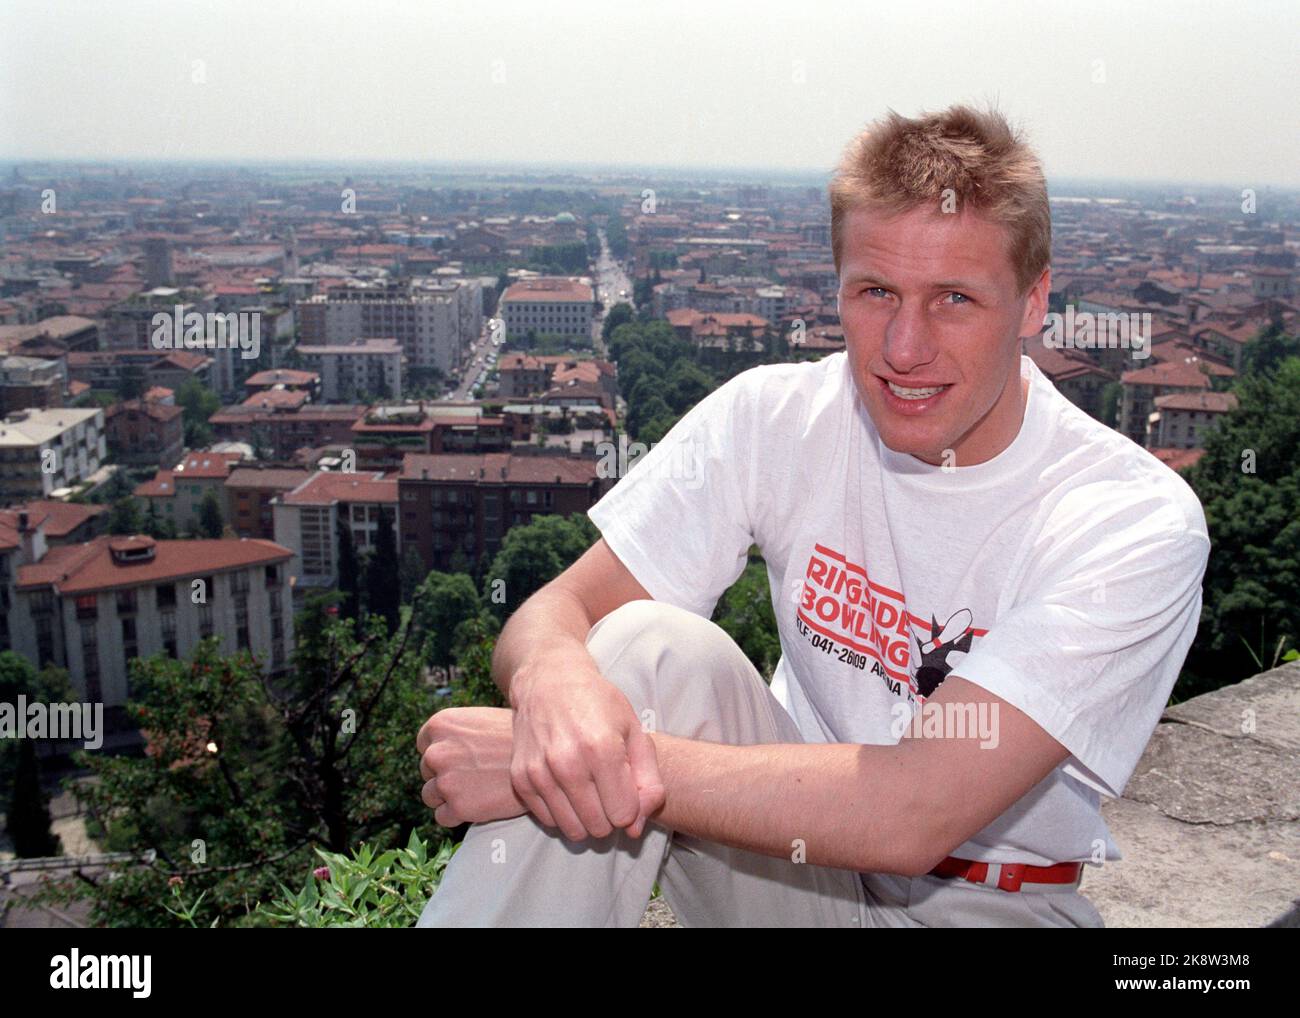 Bergamo, Italy 25.05.89: Magne Havnå with view of Bergamo, day before the match for the Championship title in professional boxing, Cruiser weight. Photo: Morten Hvaal Stock Photo - Alamy